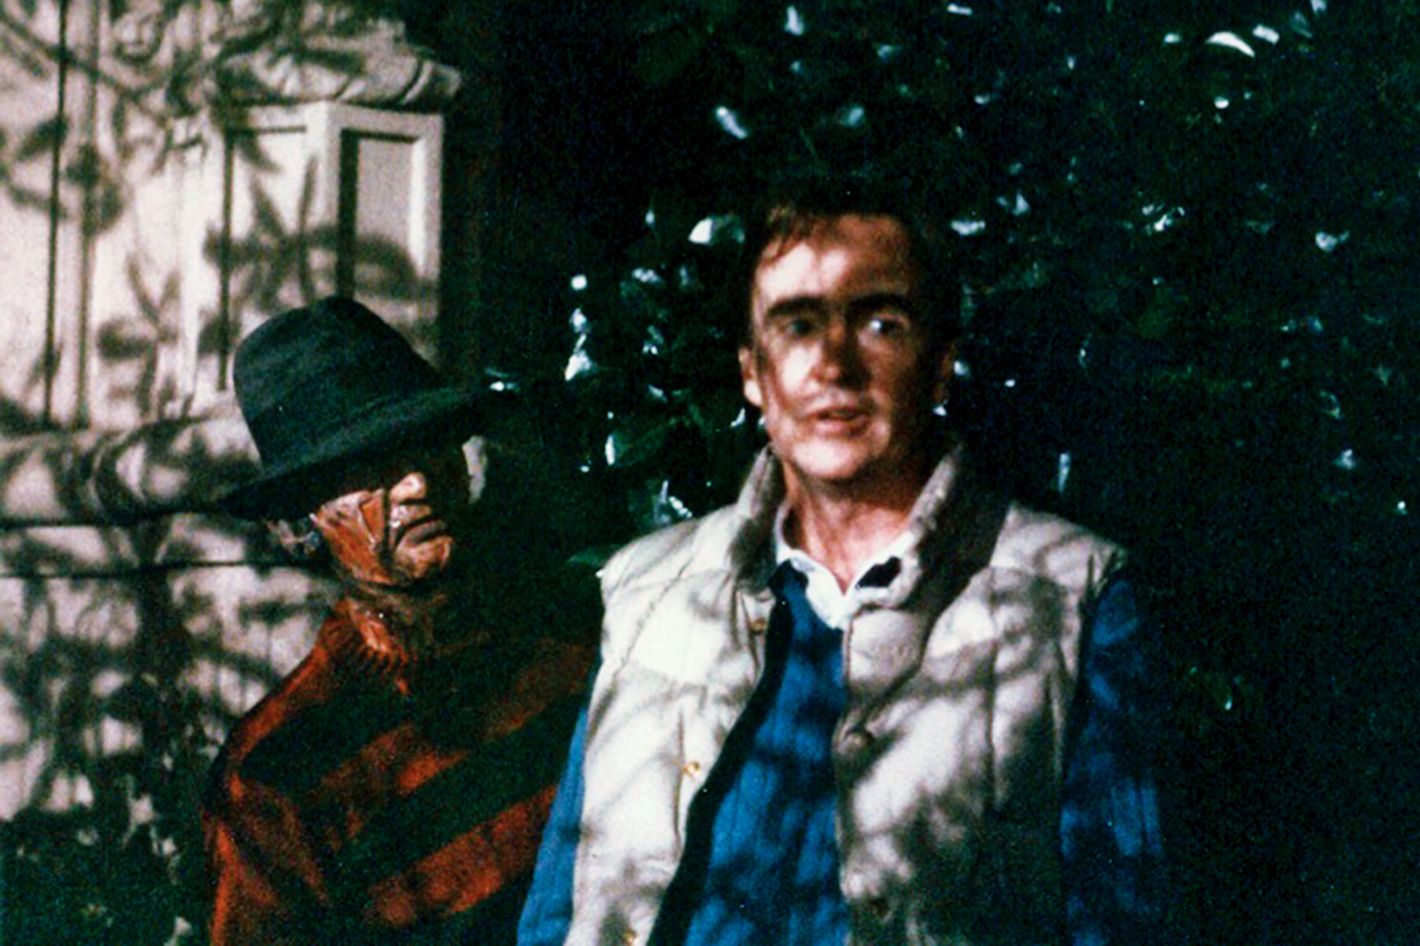 Freddy Lives An Oral History of A Nightmare on Elm Street